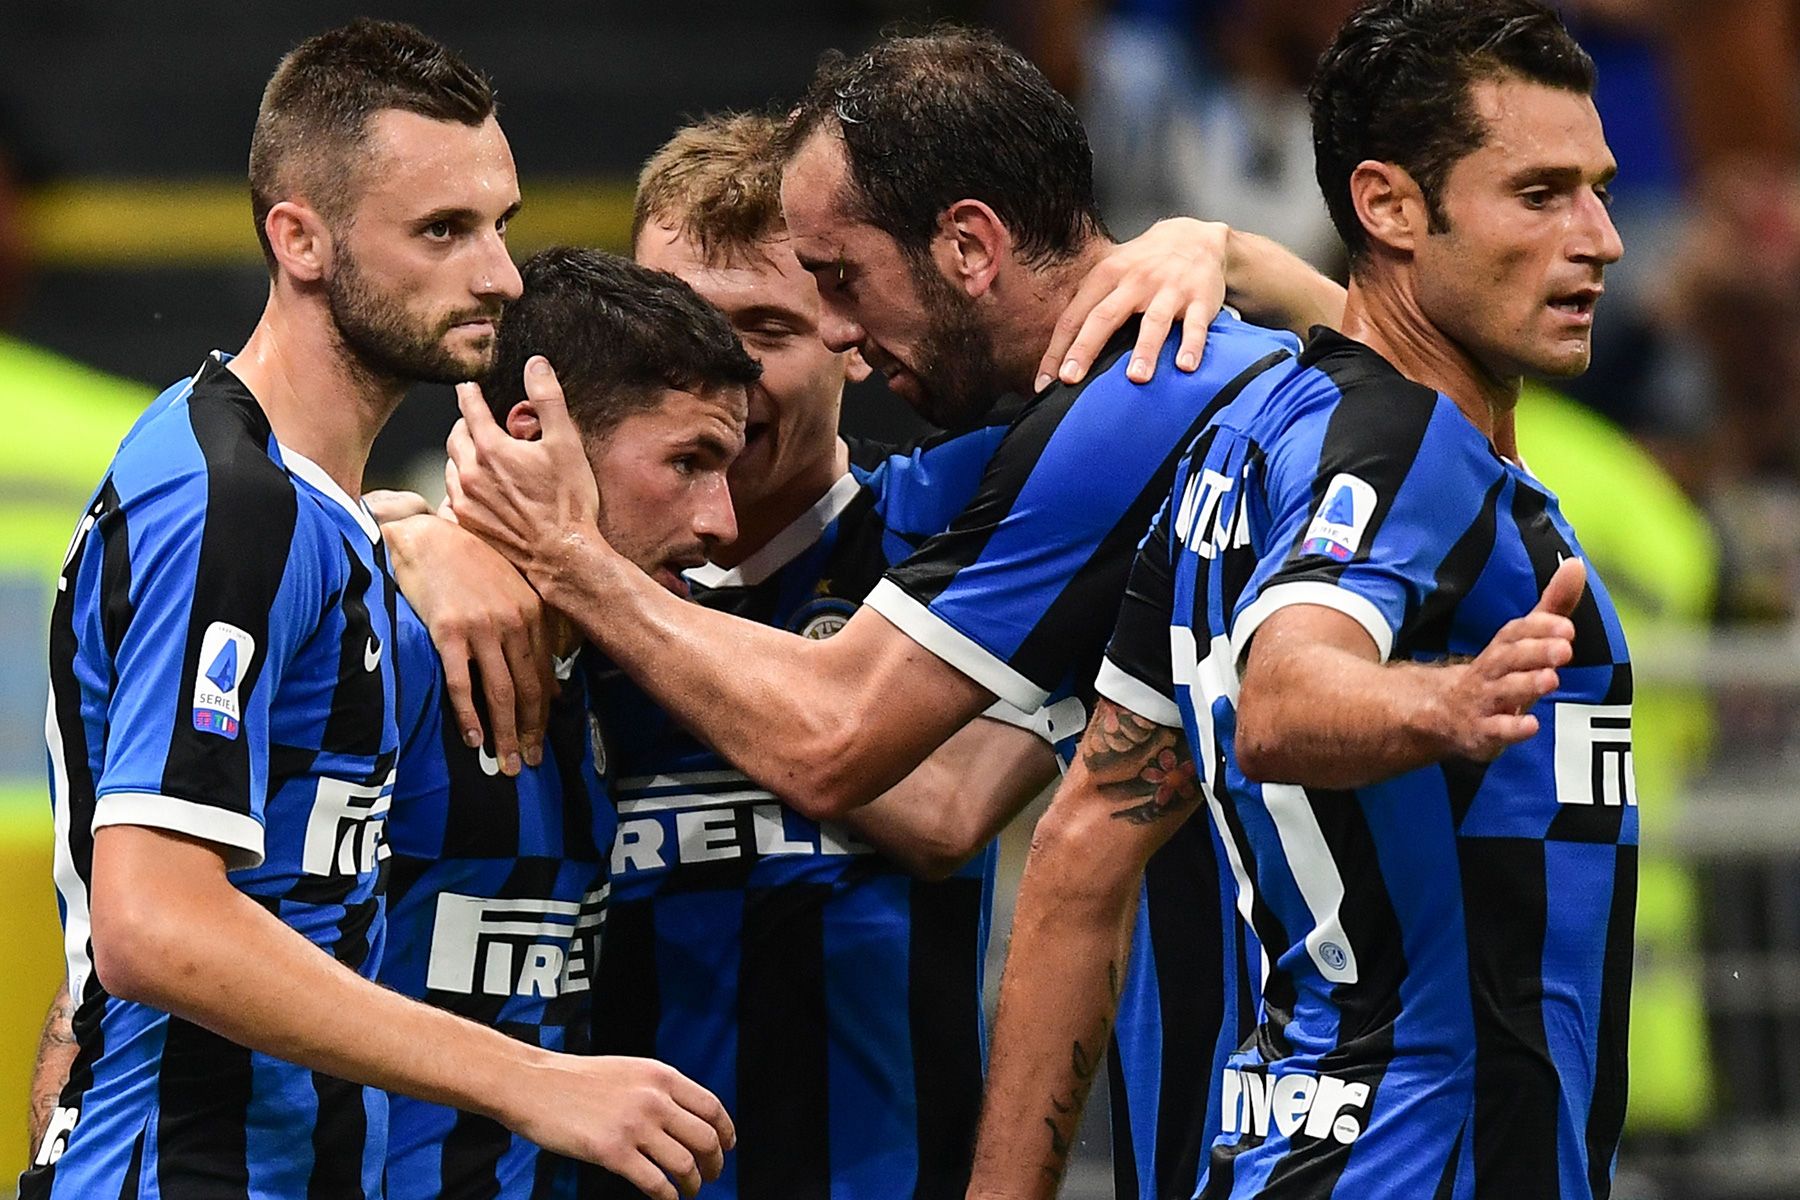 The players of the Inter of Milan celebrate the goal